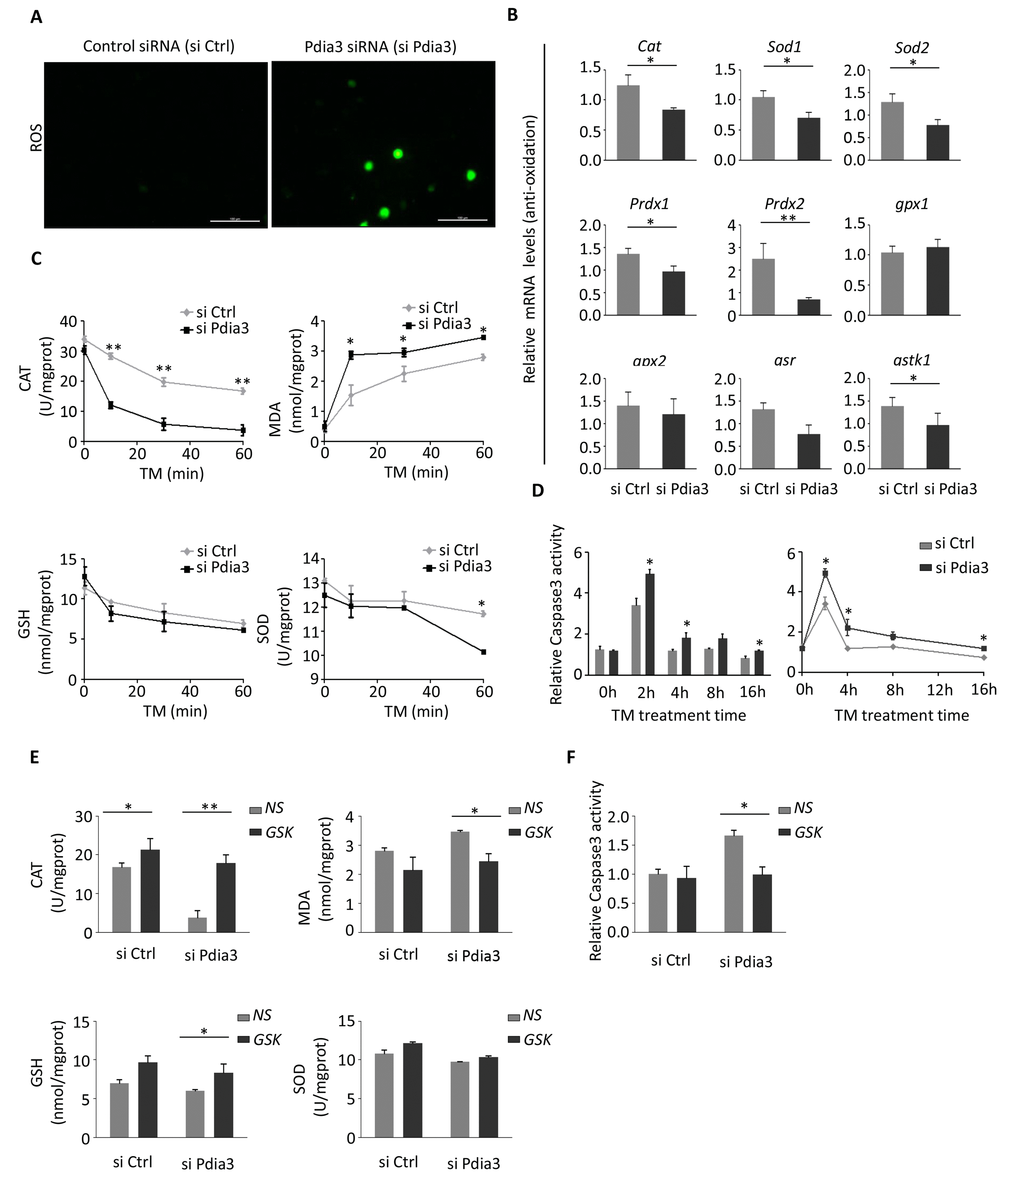 Loss of PDIA3 promotes oxidative stress and apoptosis via the PERK pathway. (A) ROS activities were detected in the control siRNA (siCtrl)-treated and Pdia3 siRNA (siPdia3)-treated AML12 cells. After transfection for 24 hours, cells were exposed to 2 μg/mL TM for 6 hours; n=4 for all groups. (B) Relative Caspase 3 activity were detected in TM-treated AML12 cells. The cell treatment method was the same as in A. Caspase activity was measured in the cell lysate after addition of TM. The left panel shows the activity of the caspases after Pdia3 inhibition at a specific time point. The panel on the right shows the corresponding line graph. (n=3). **, PPC) SOD, MDA, GSH and CAT activities were analyzed in AML12 cell homogenate treated as in (A) at the indicated times (0, 20, 40, and 60 minutes). CAT, GSH and SOD represent the antioxidation level; MDA represents the oxidation level. (n=4) **, PPD) Relative expression assessed by qPCR of antioxidation genes (Cat, Sod, Sod2, Prdx1, Prdx2, gpx1, gpx2, gsr, and gstk1). Light gray represents the control group (siCtrl); dark gray represents Pdia3-inhibited group (siPdia3). Data were normalized to Gapdh expression. (n=4) **, P P E) AML12 cells were treated with the GSK inhibitor during the TM stress (2 μg/mL). Cell lysates were analyzed by the method used in (C) (n=4). **, PPF) Relative activity of Caspase 3 was analyzed with the PERK inhibitor (GSK) and TM stress (2 μg/mL). (n=4) **, P P 